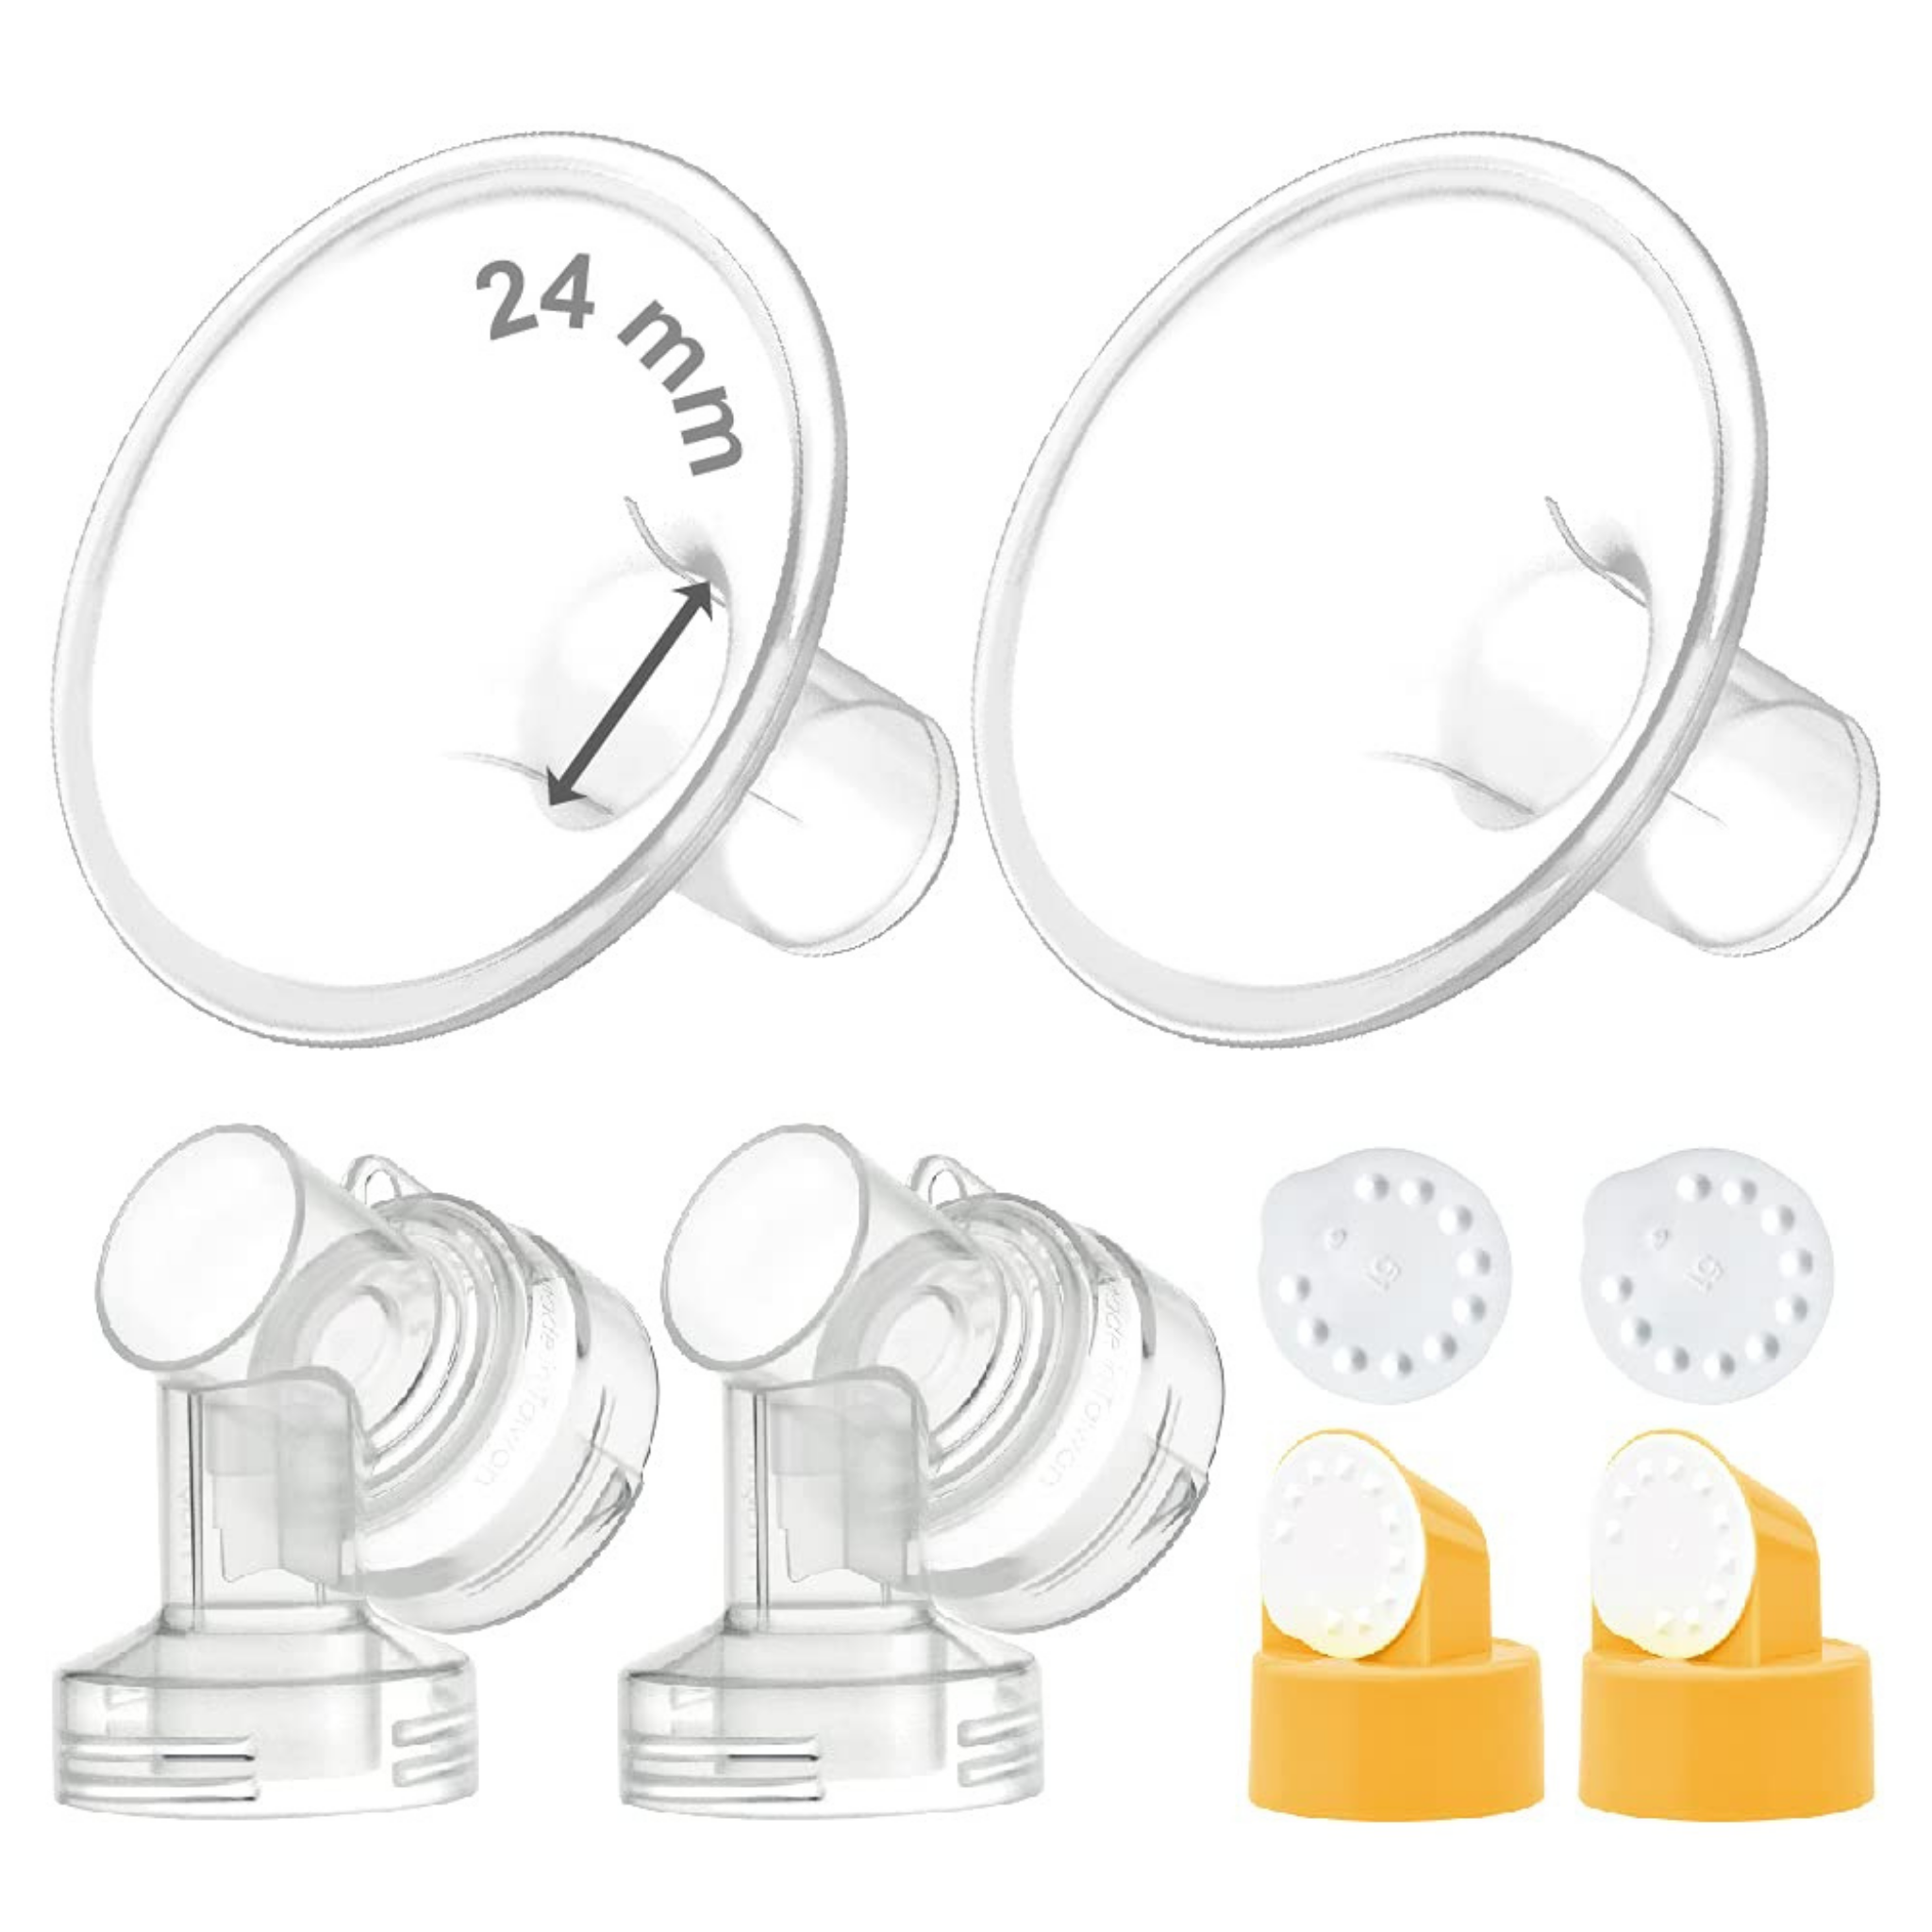 The Medela Freestyle Hands Free Breast Pump with Free Bundle Set